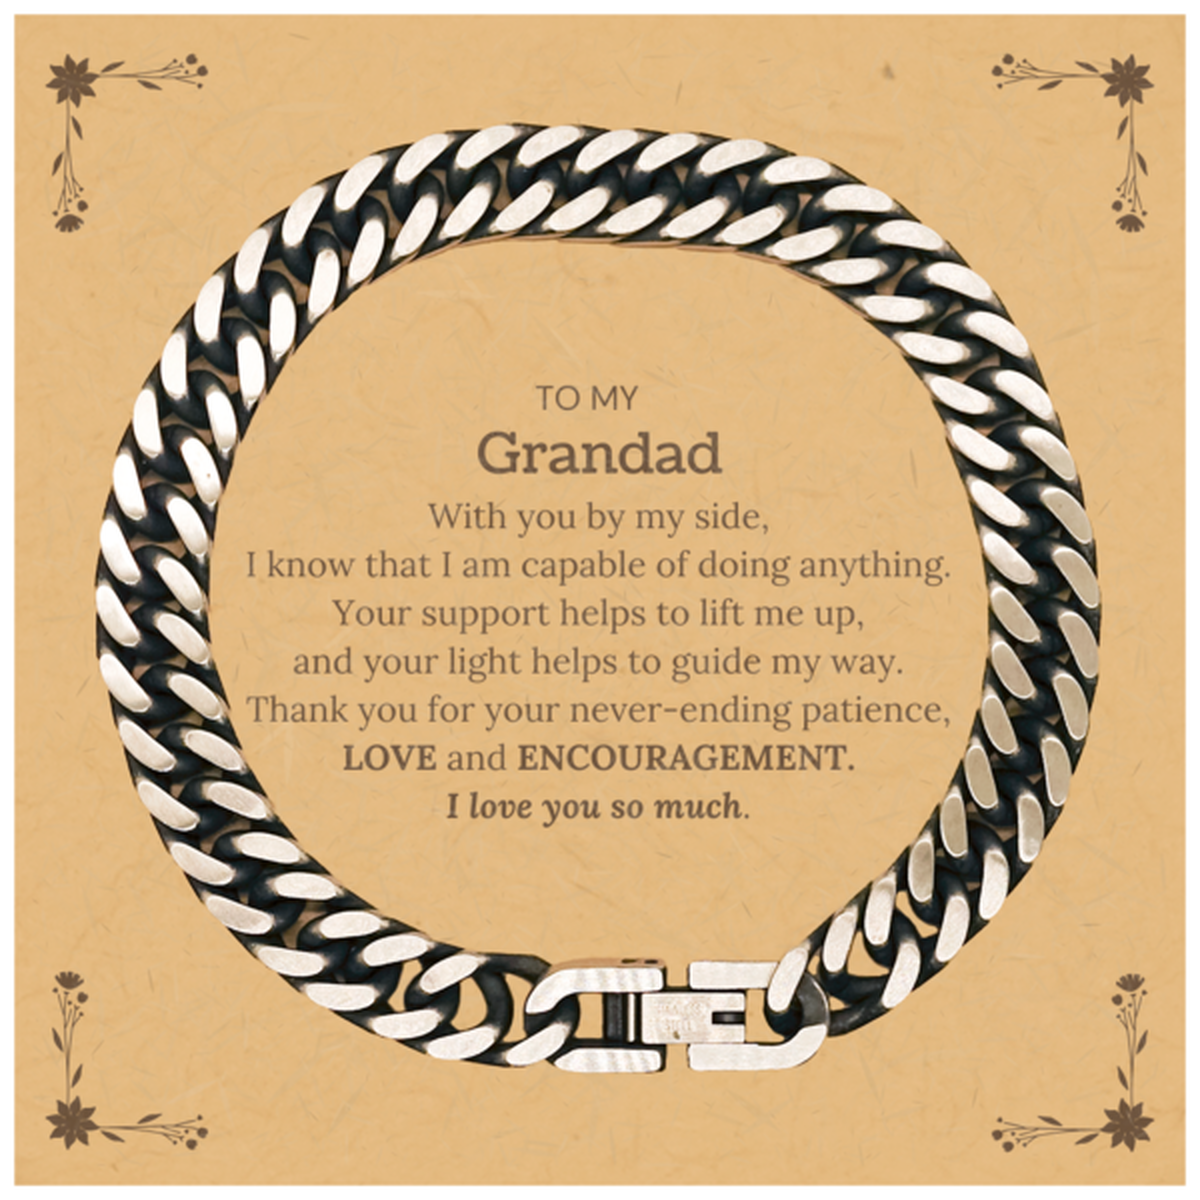 Appreciation Grandad Cuban Link Chain Bracelet Gifts, To My Grandad Birthday Christmas Wedding Keepsake Gifts for Grandad With you by my side, I know that I am capable of doing anything. I love you so much